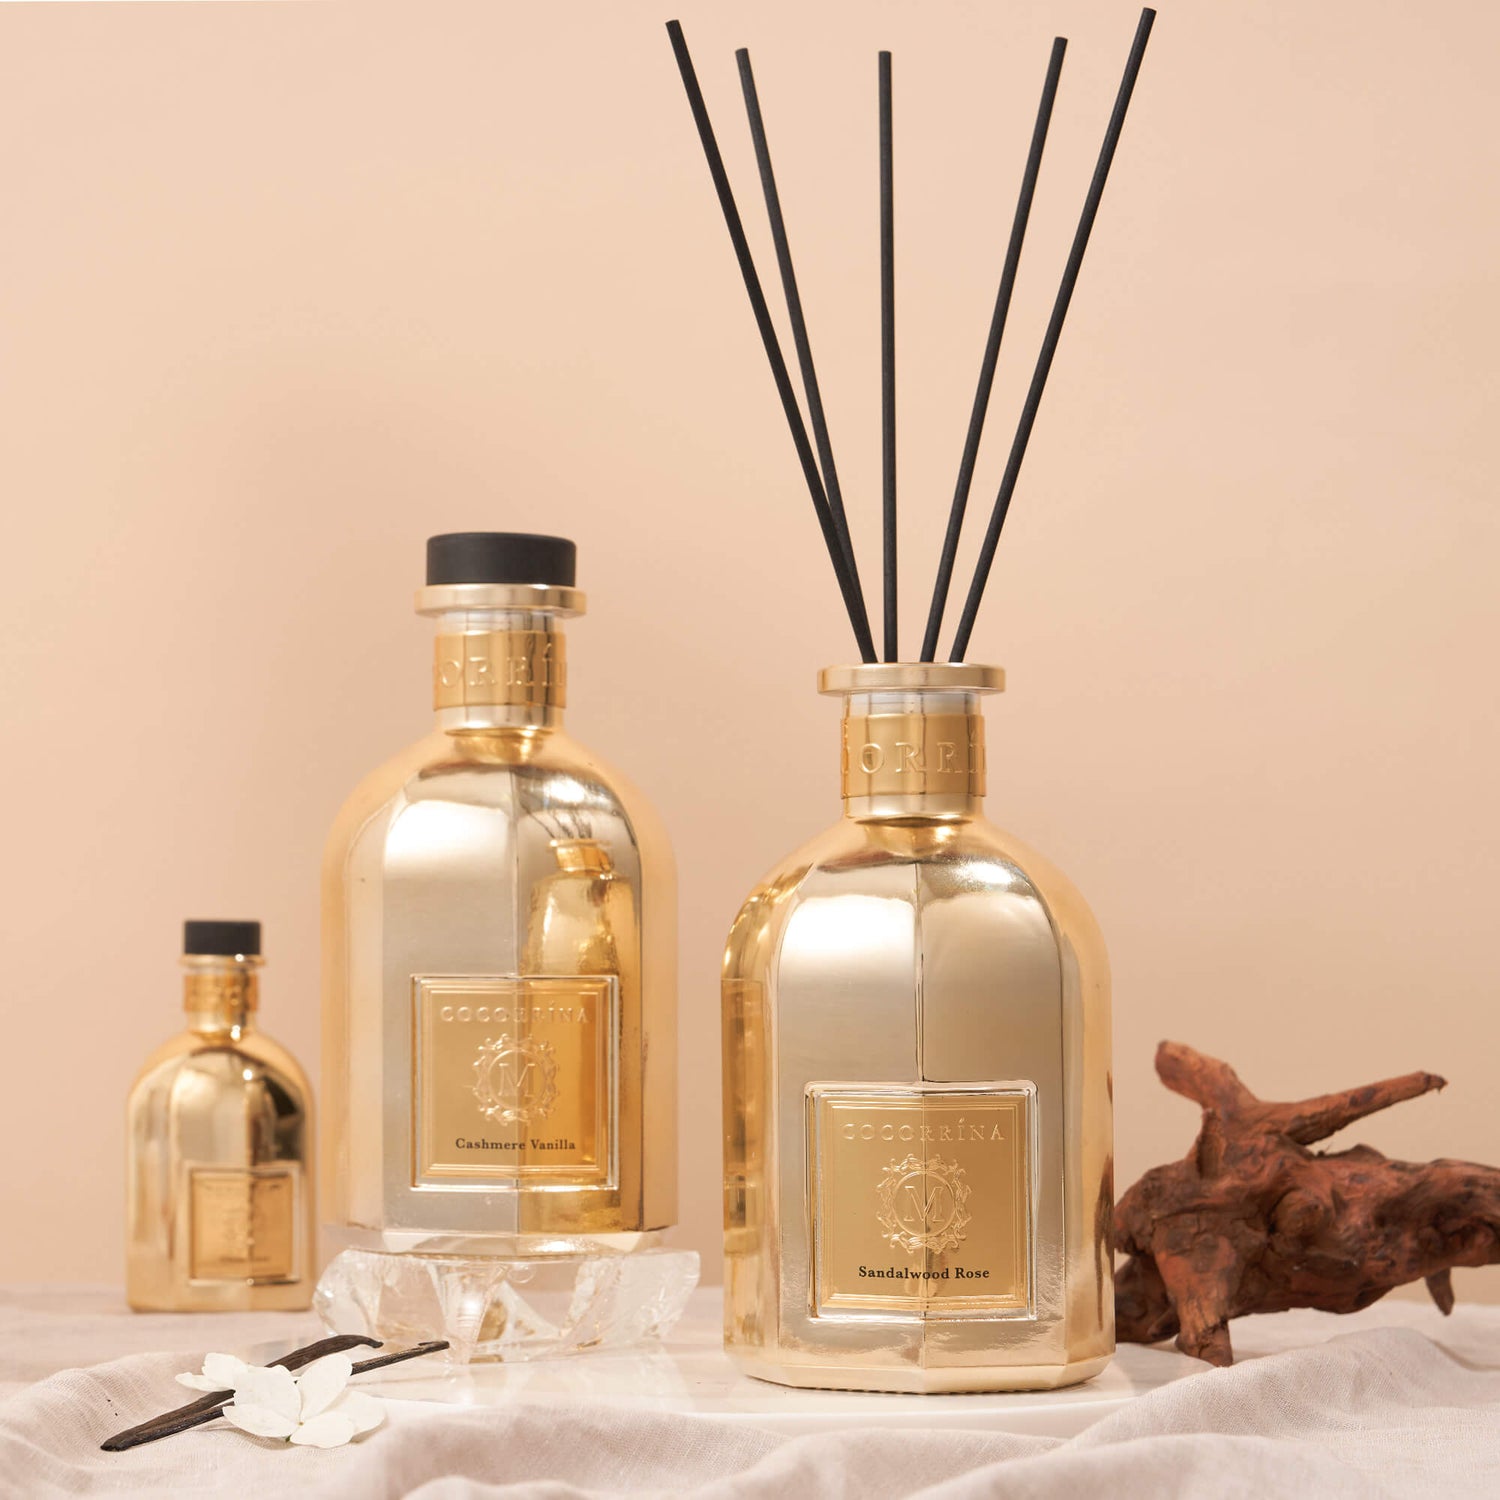 Are Reed Diffusers Safe for Dogs?